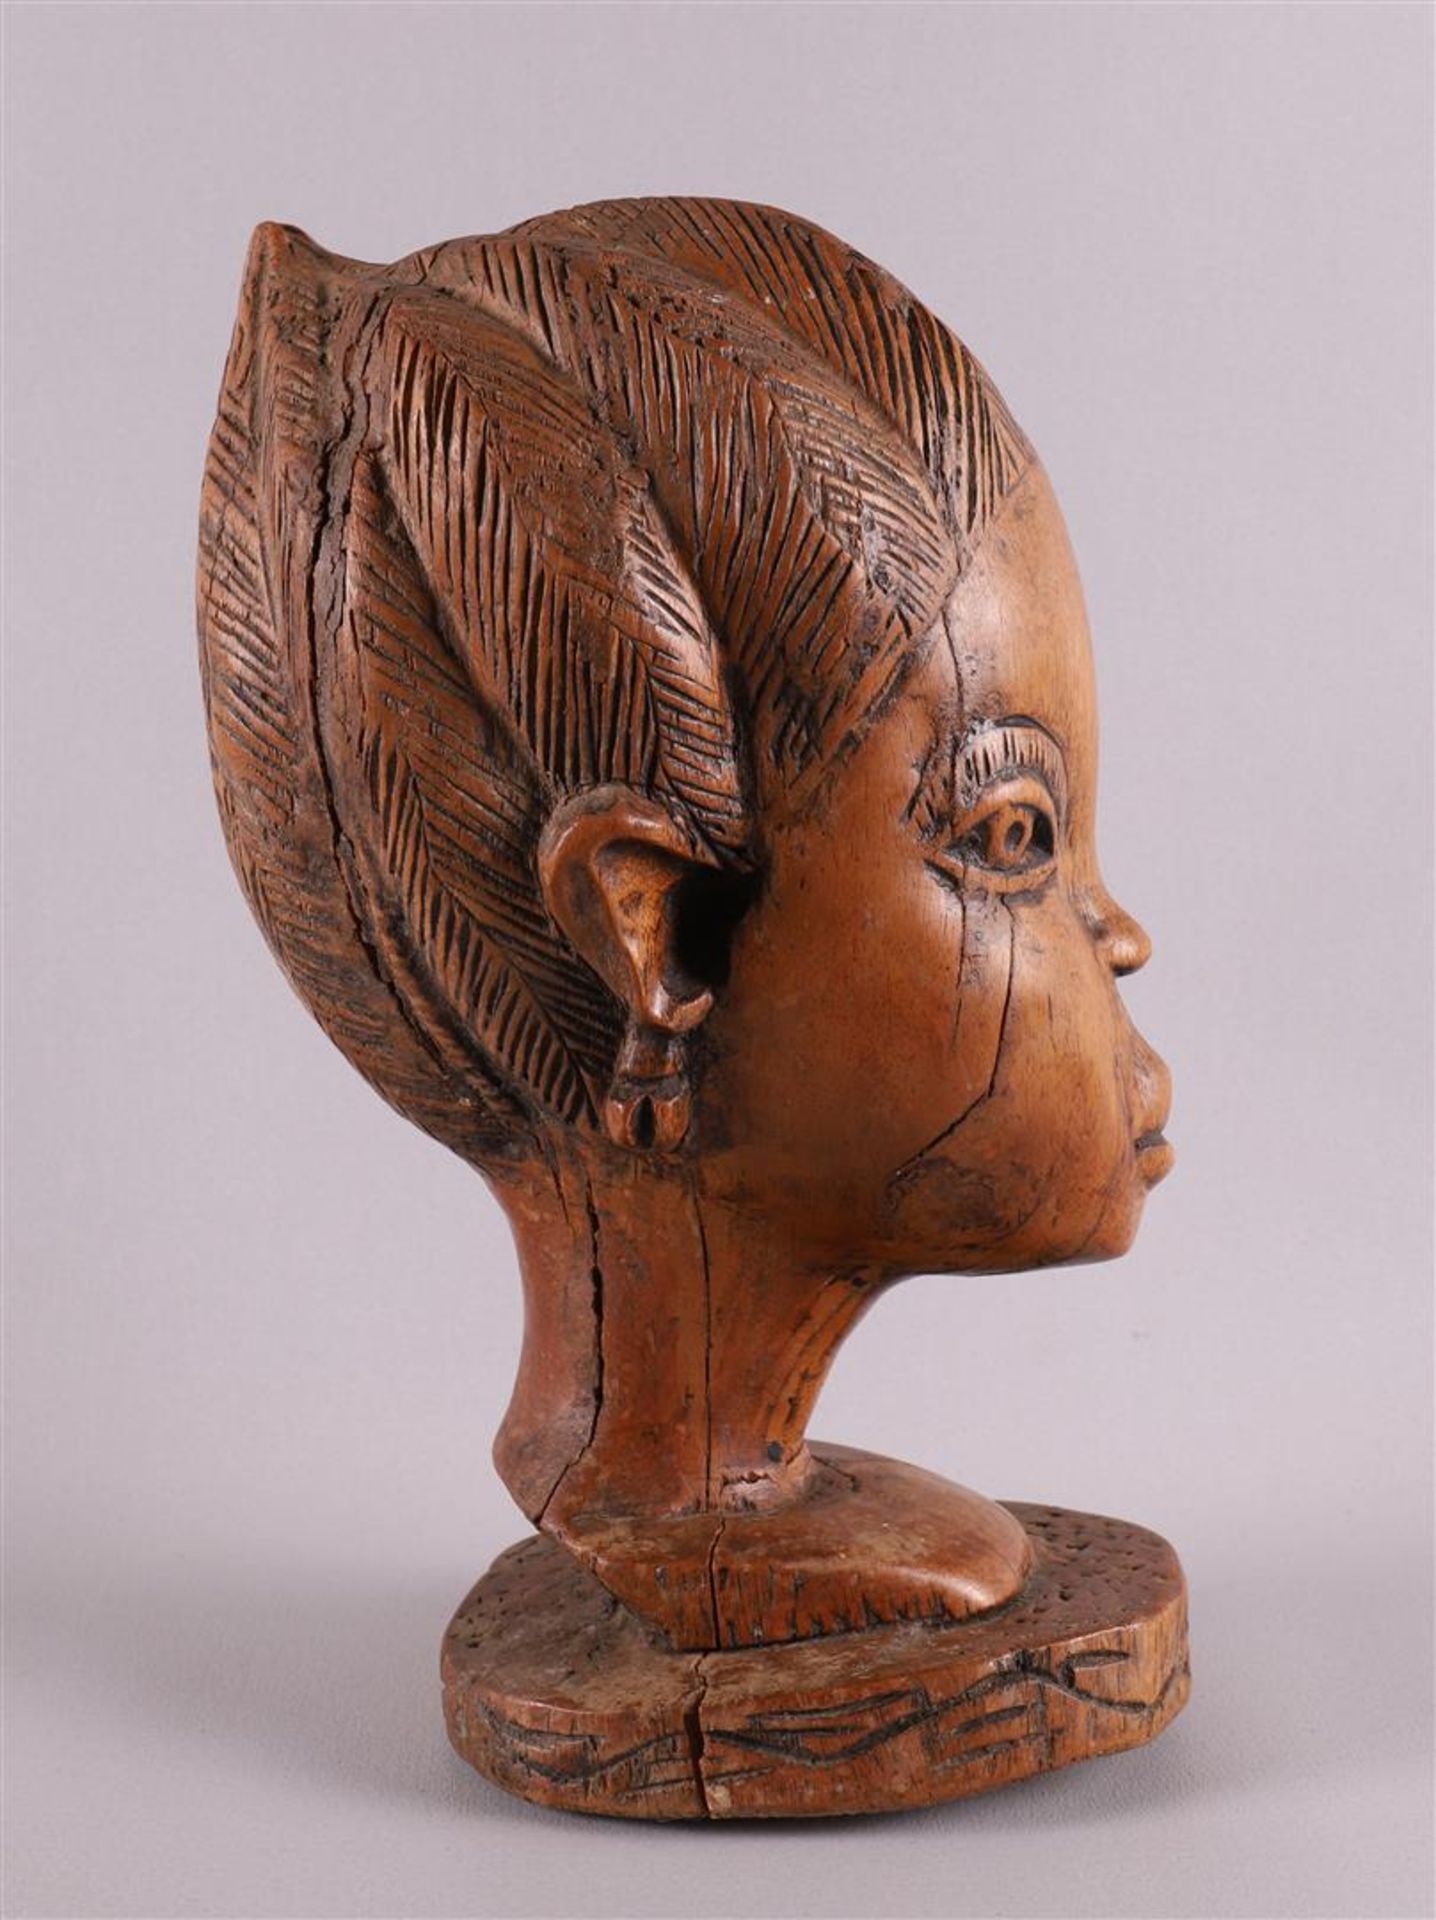 Ethnography. A tropical wooden bust of a woman, Africa, Ivory Coast or surroundings, 20th century, h - Image 3 of 4